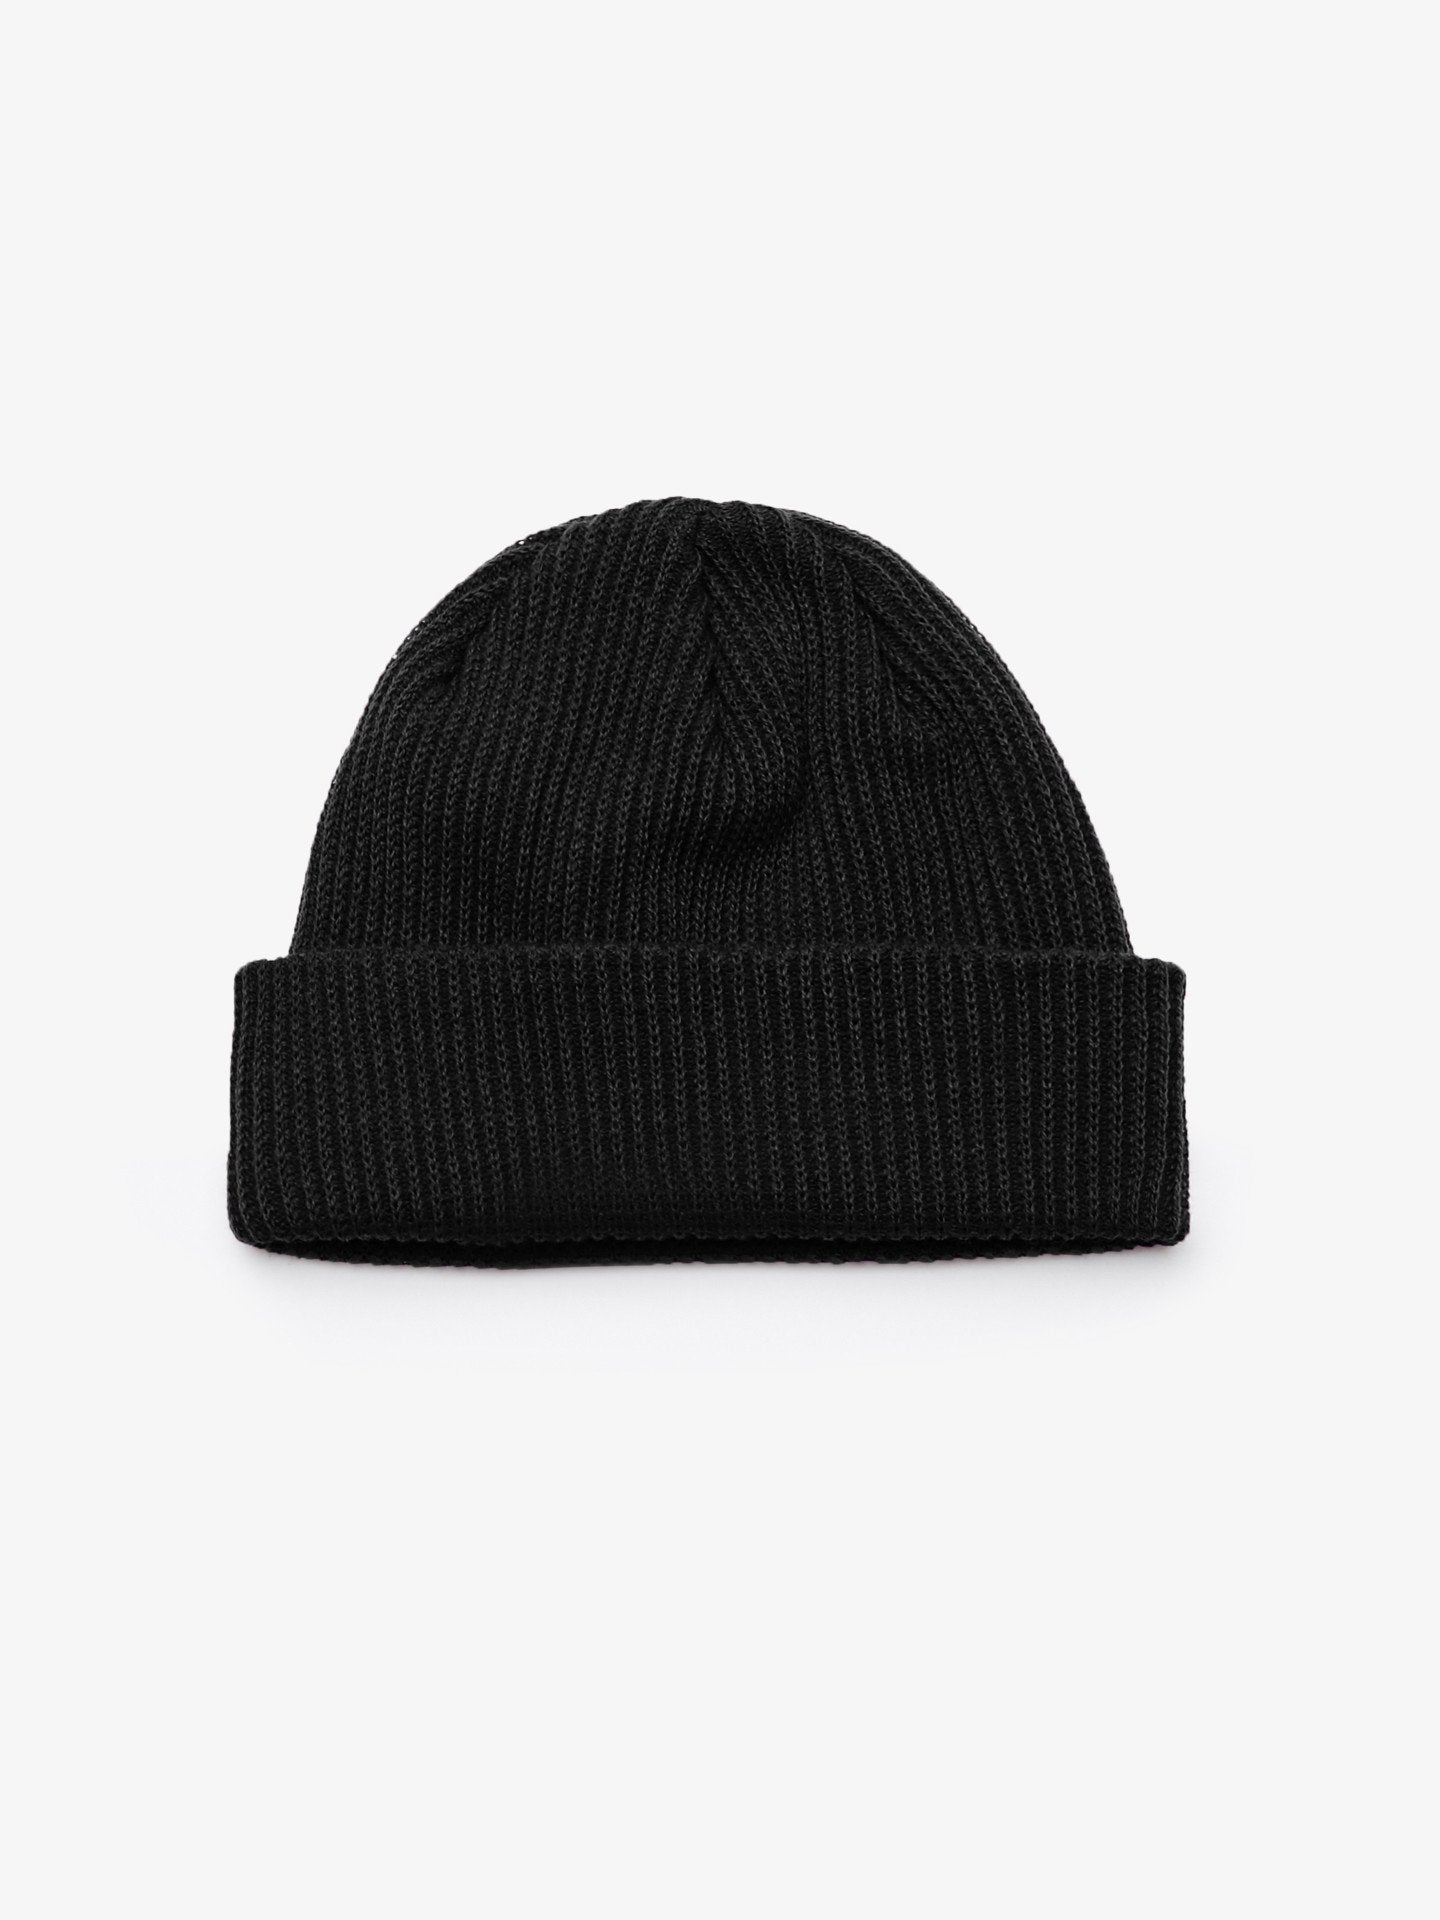 OBEY - Subversion Beanie, Black - The Giant Peach